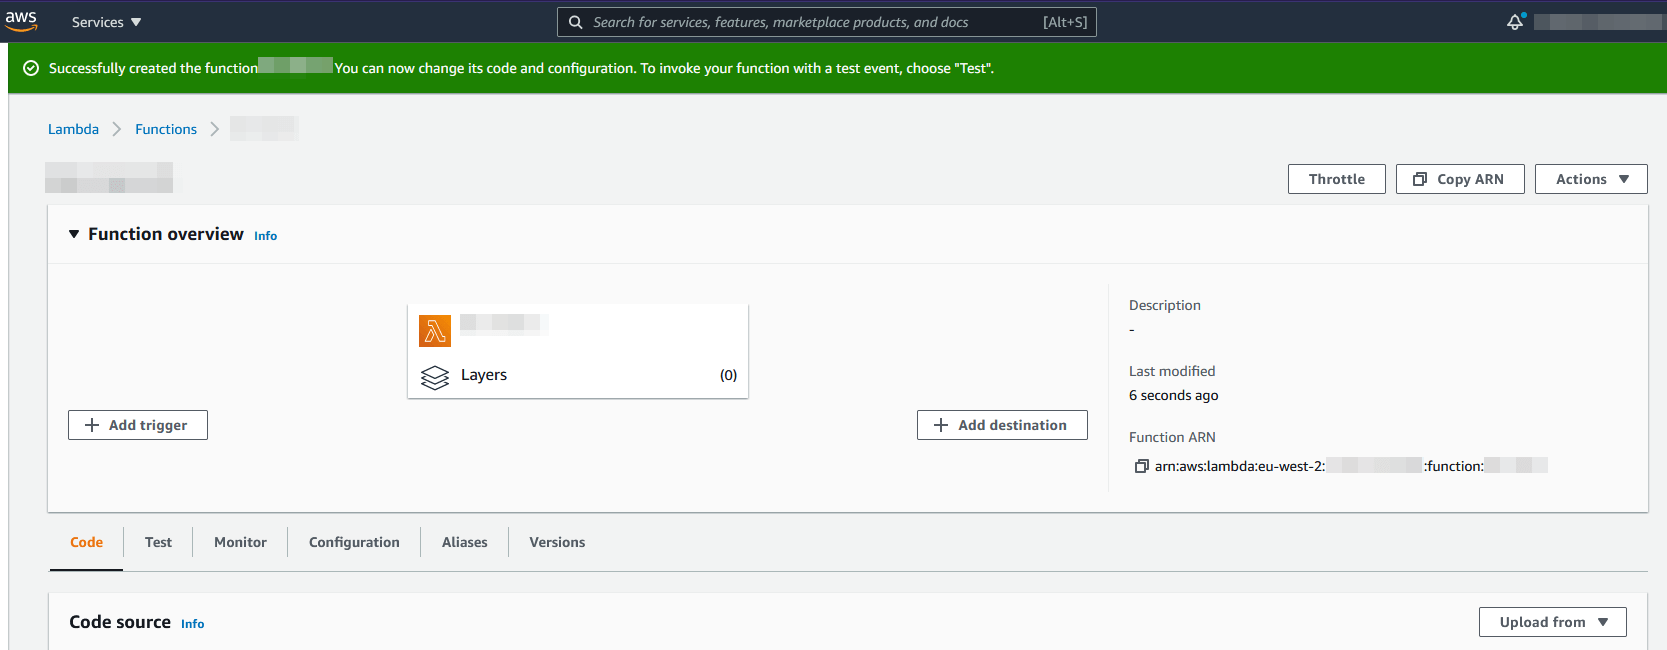 Screenshot of the aws console with a successfully created lambda function